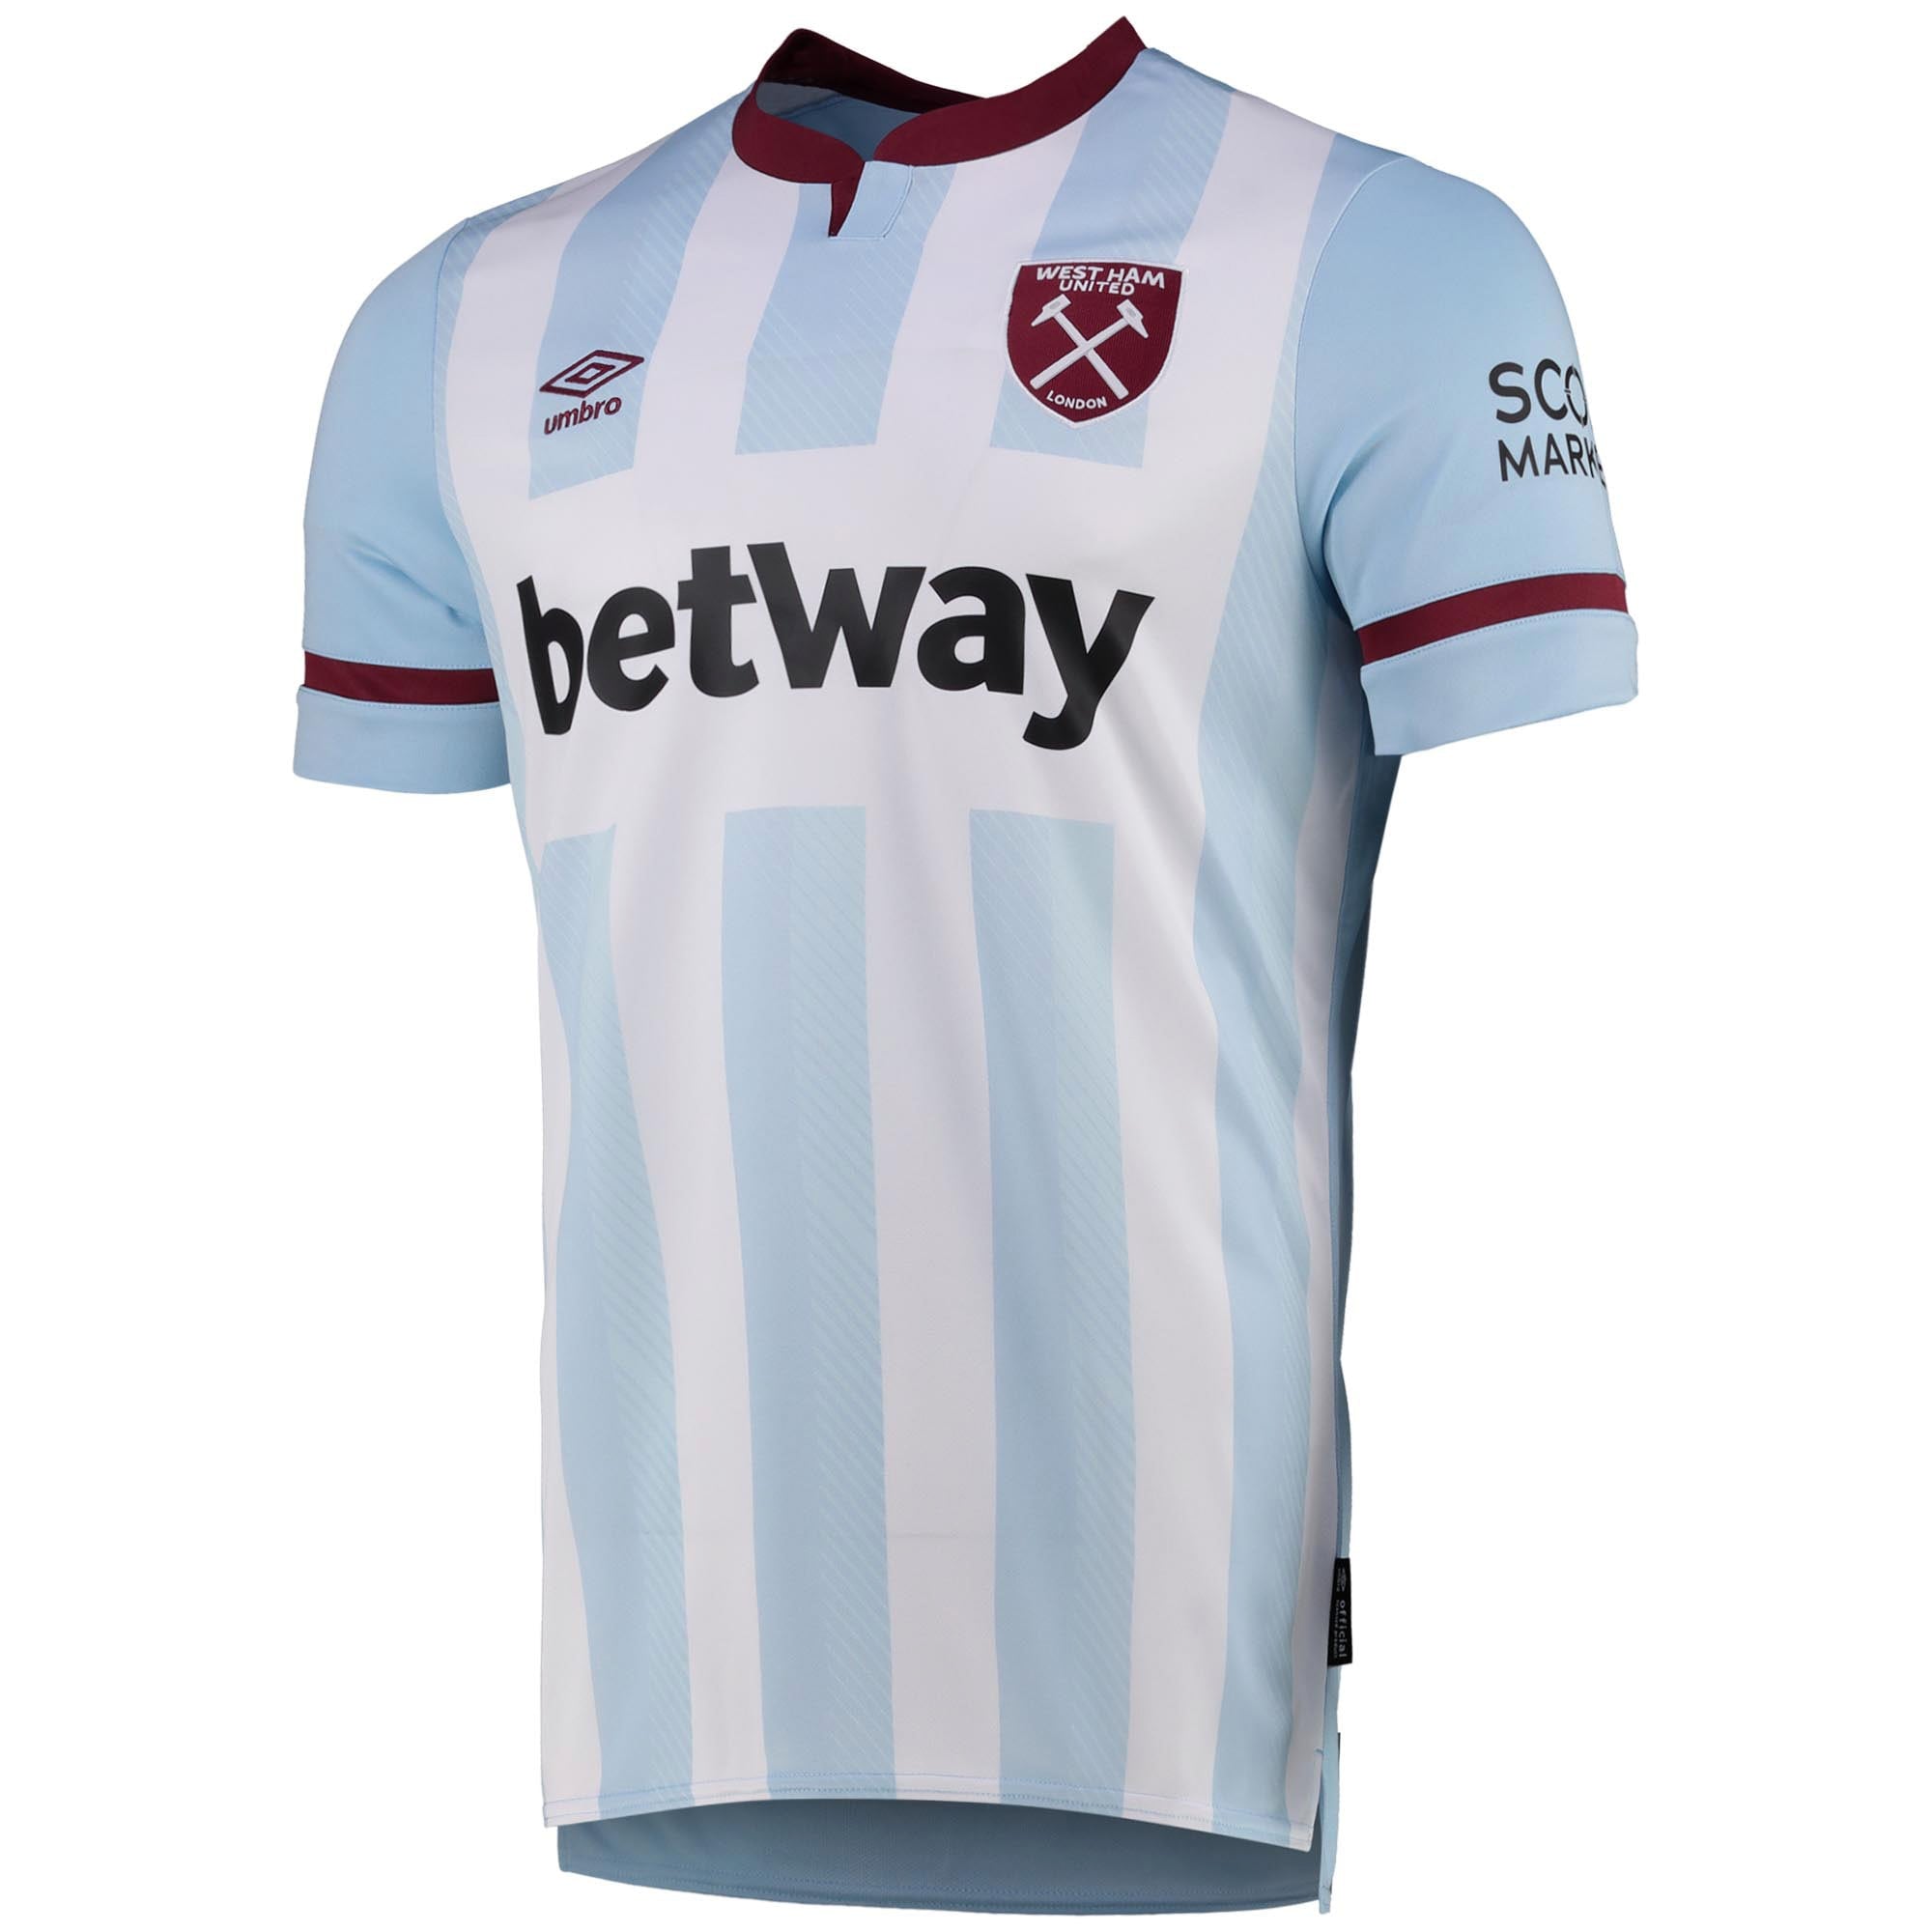 West Ham United Away Shirt 2021-22 with Soucek 28 printing